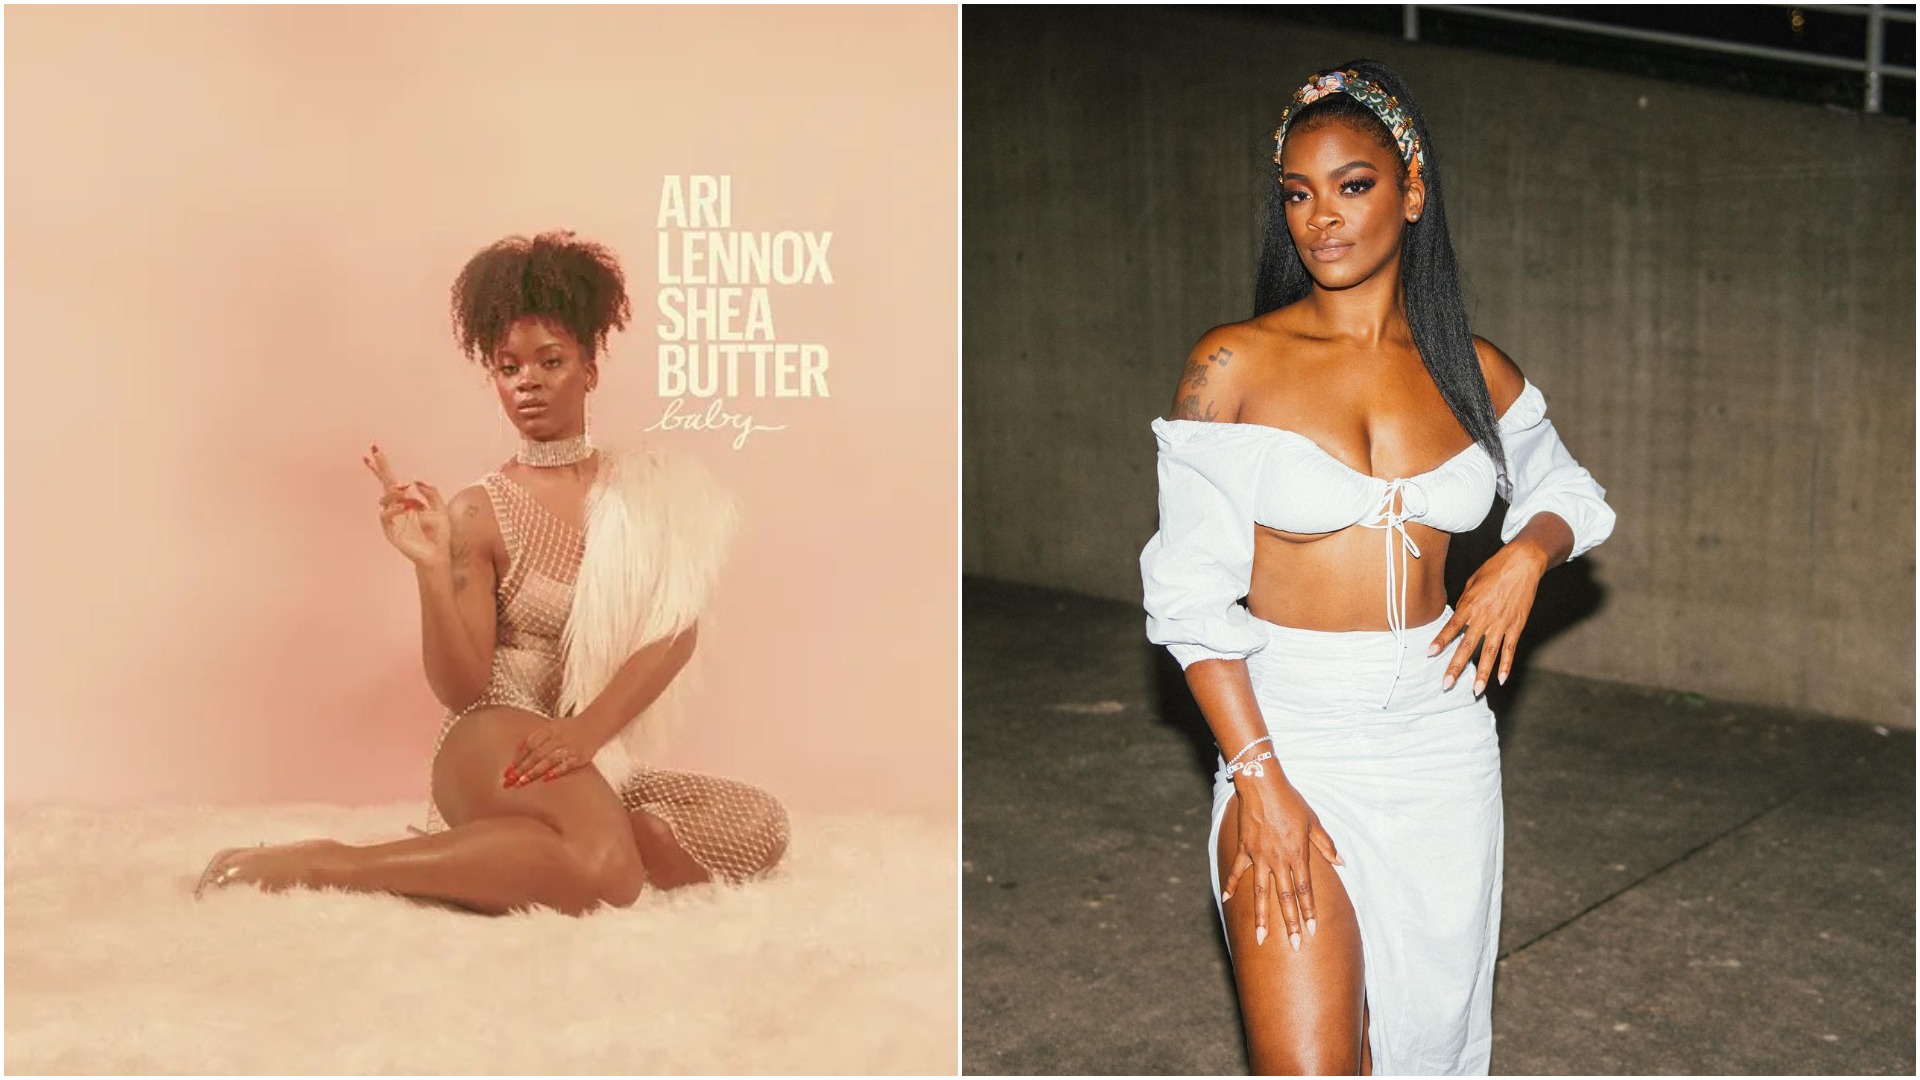 "Smegma-Gate": Here Is Why Ari Lennox Was So Brutal To 'Adoring' SA Fan Showing Her Love